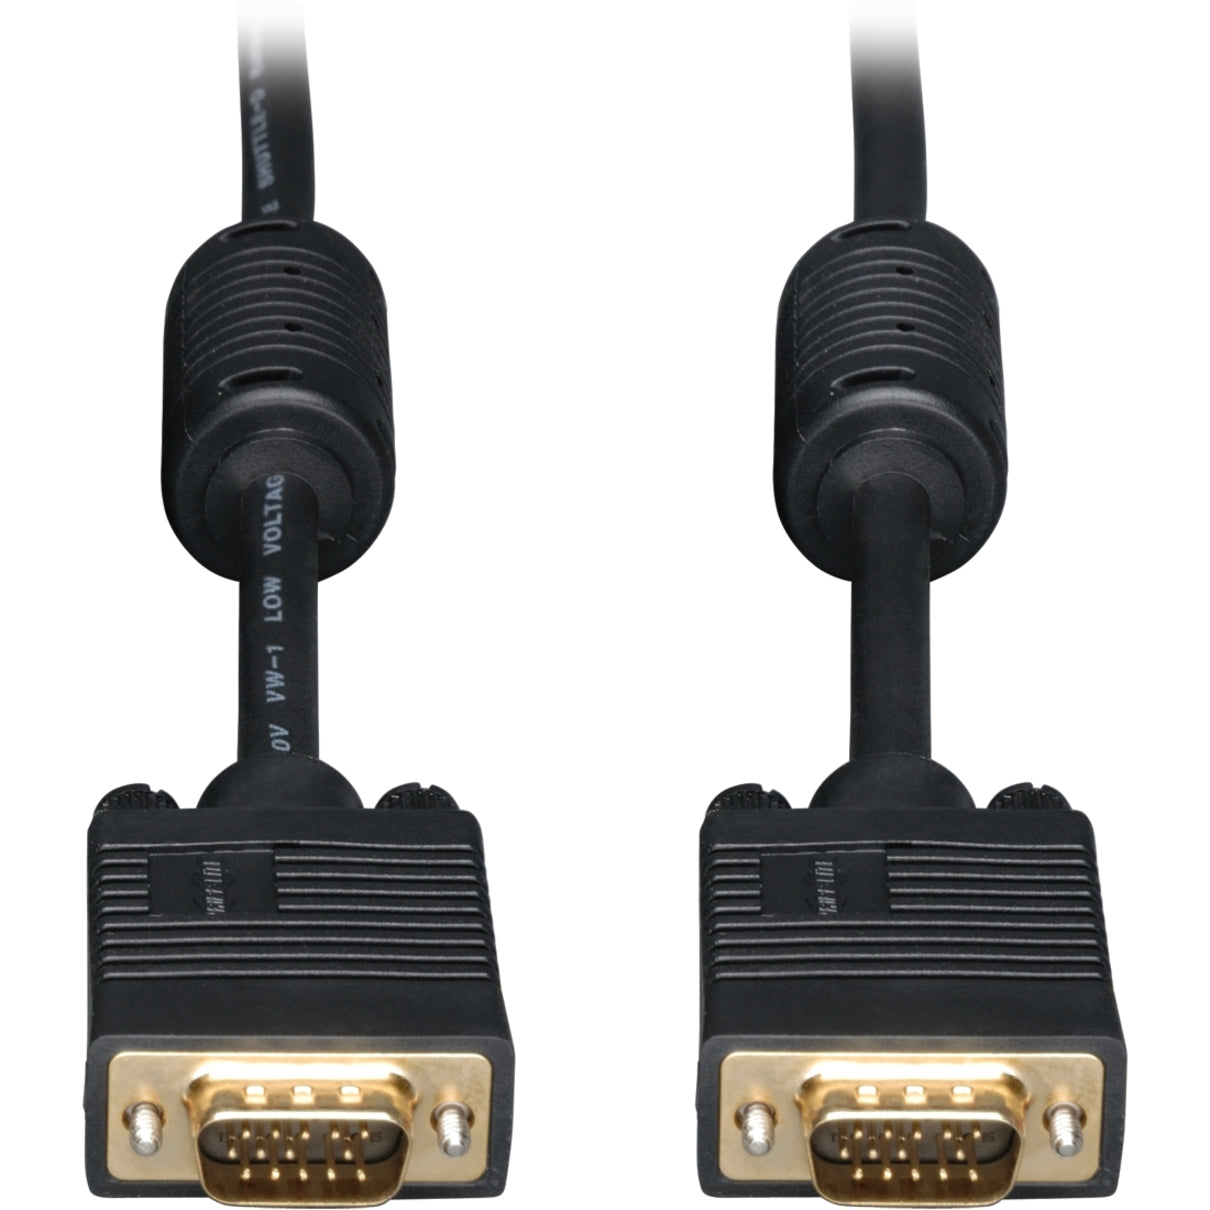 Tripp Lite P502-020 20-ft. SVGA/VGA Monitor Gold Cable with RGB Coax, High-Quality Video Transmission